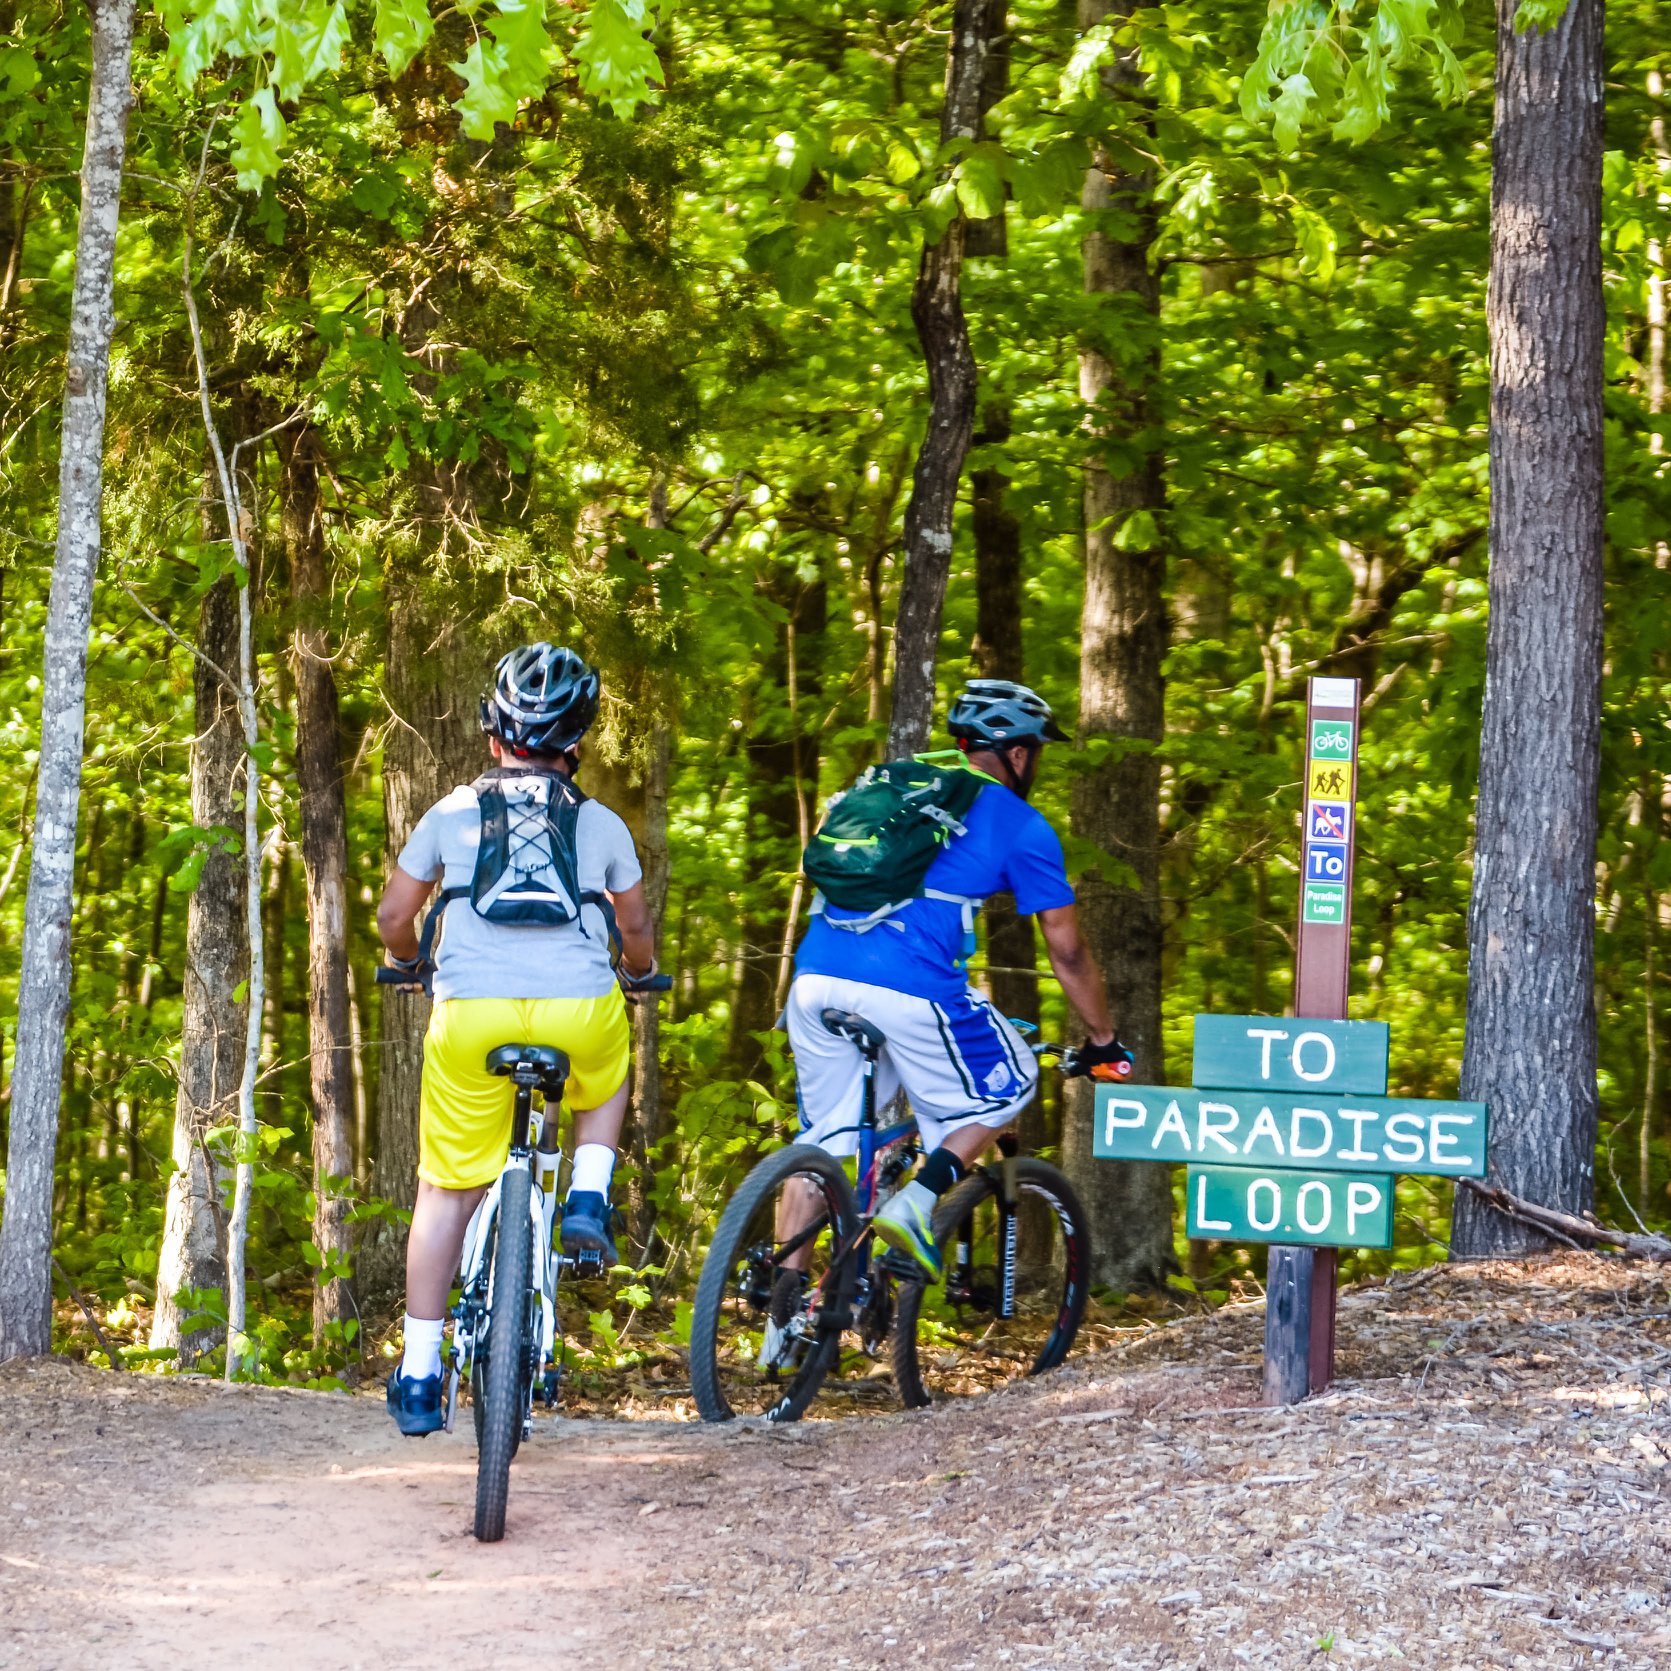 alt=Photo of bikers entering the Paradise Loop trail at the Anne Springs Close Greenway